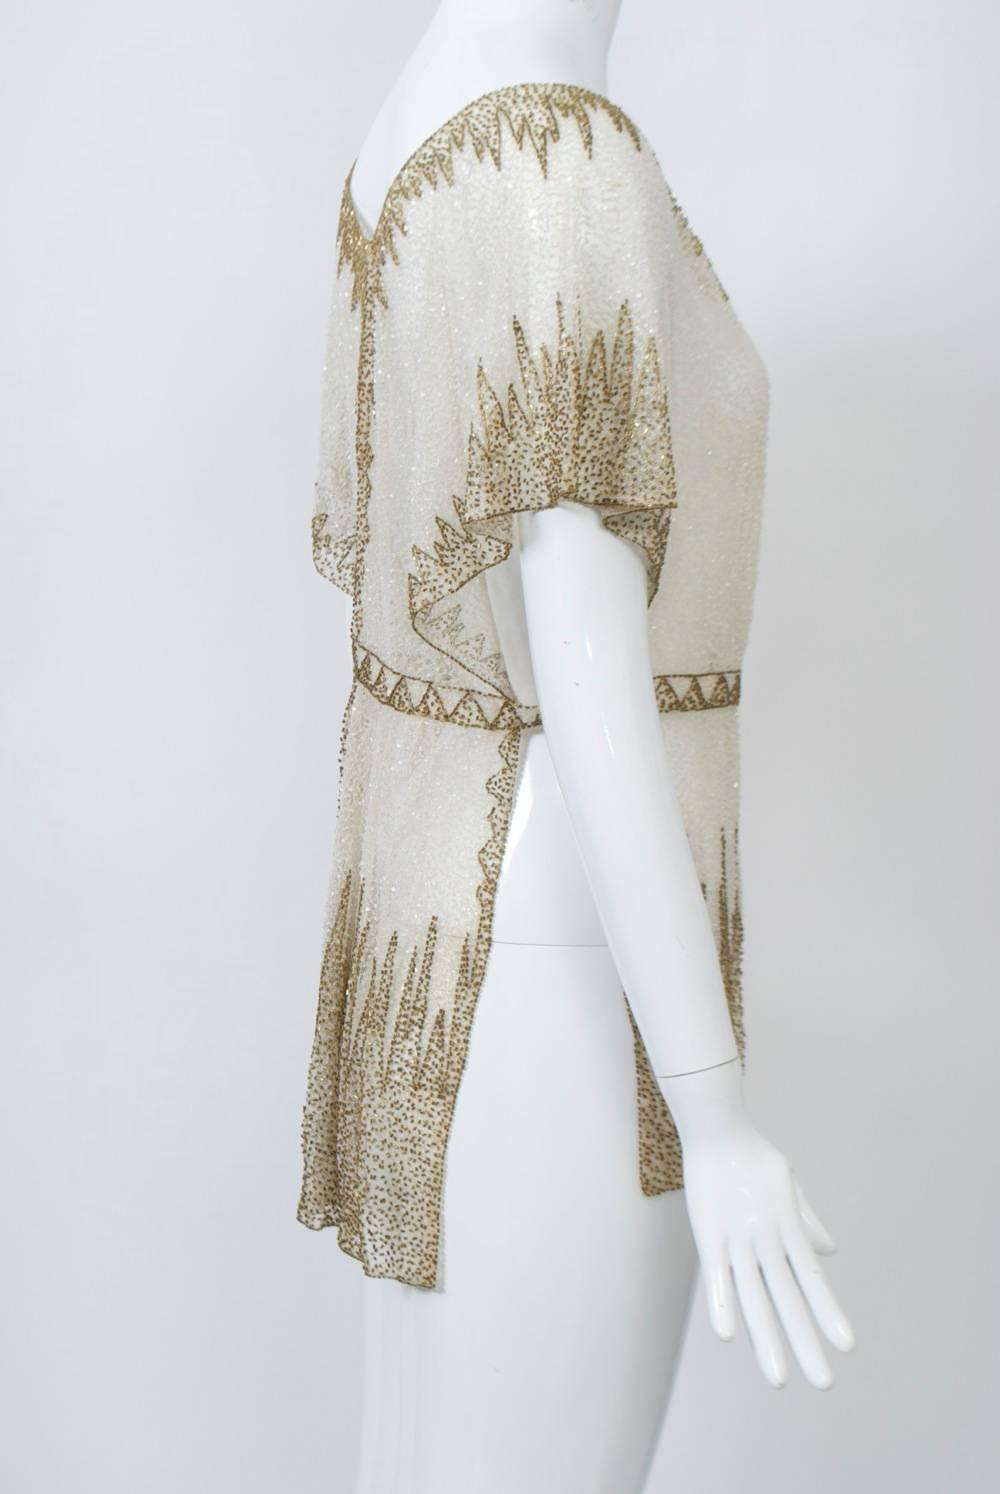 Extravagantly beaded sheer tunic of tiny crystal beads overlayed with a deep flame-pattern border at the hem in gold beads, a pattern which is echoed around the soft V-neckline and wide cap sleeves. Around the waist and across the open sides is a